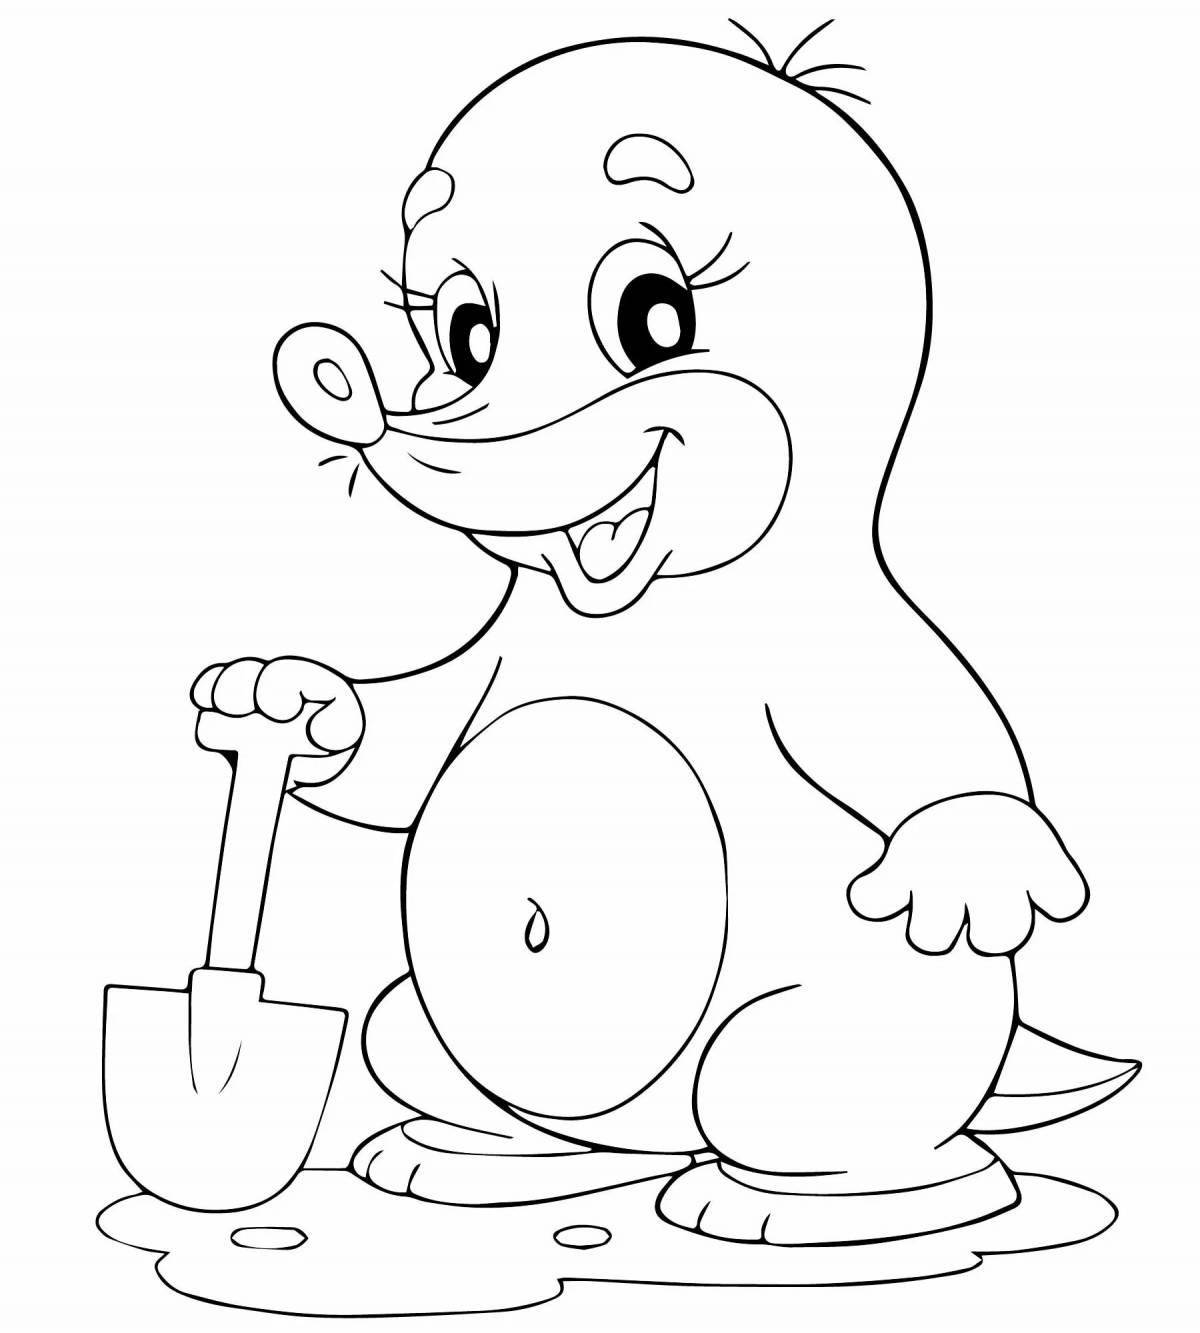 Adorable mole coloring book for kids